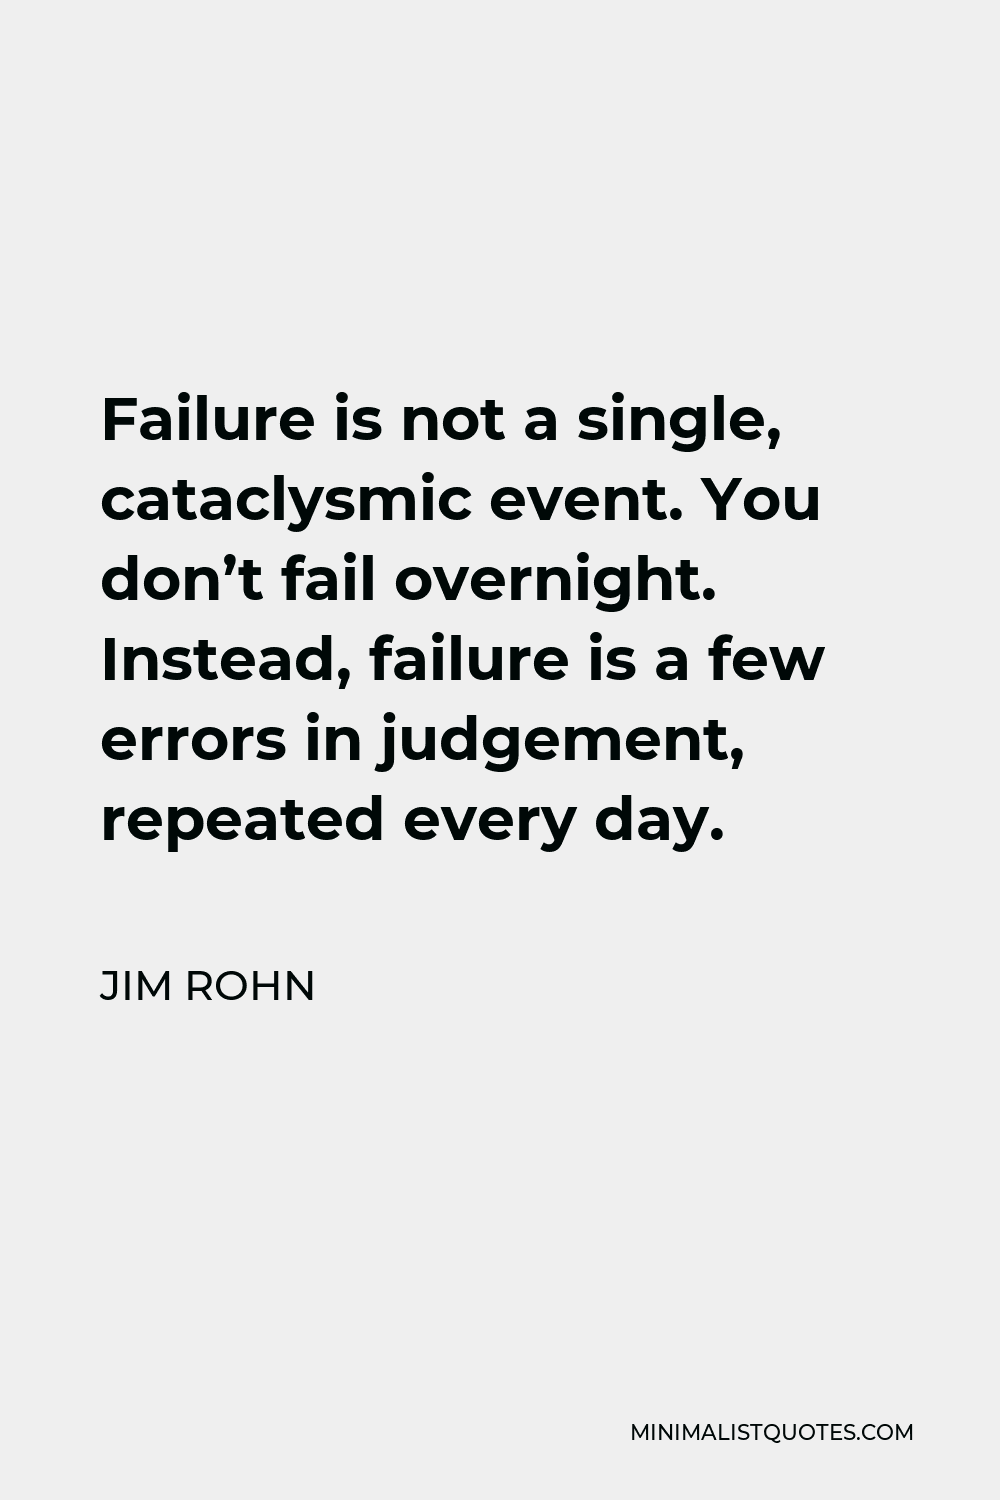 Jim Rohn Quote - Failure is not a single, cataclysmic event. You don’t fail overnight. Instead, failure is a few errors in judgement, repeated every day.